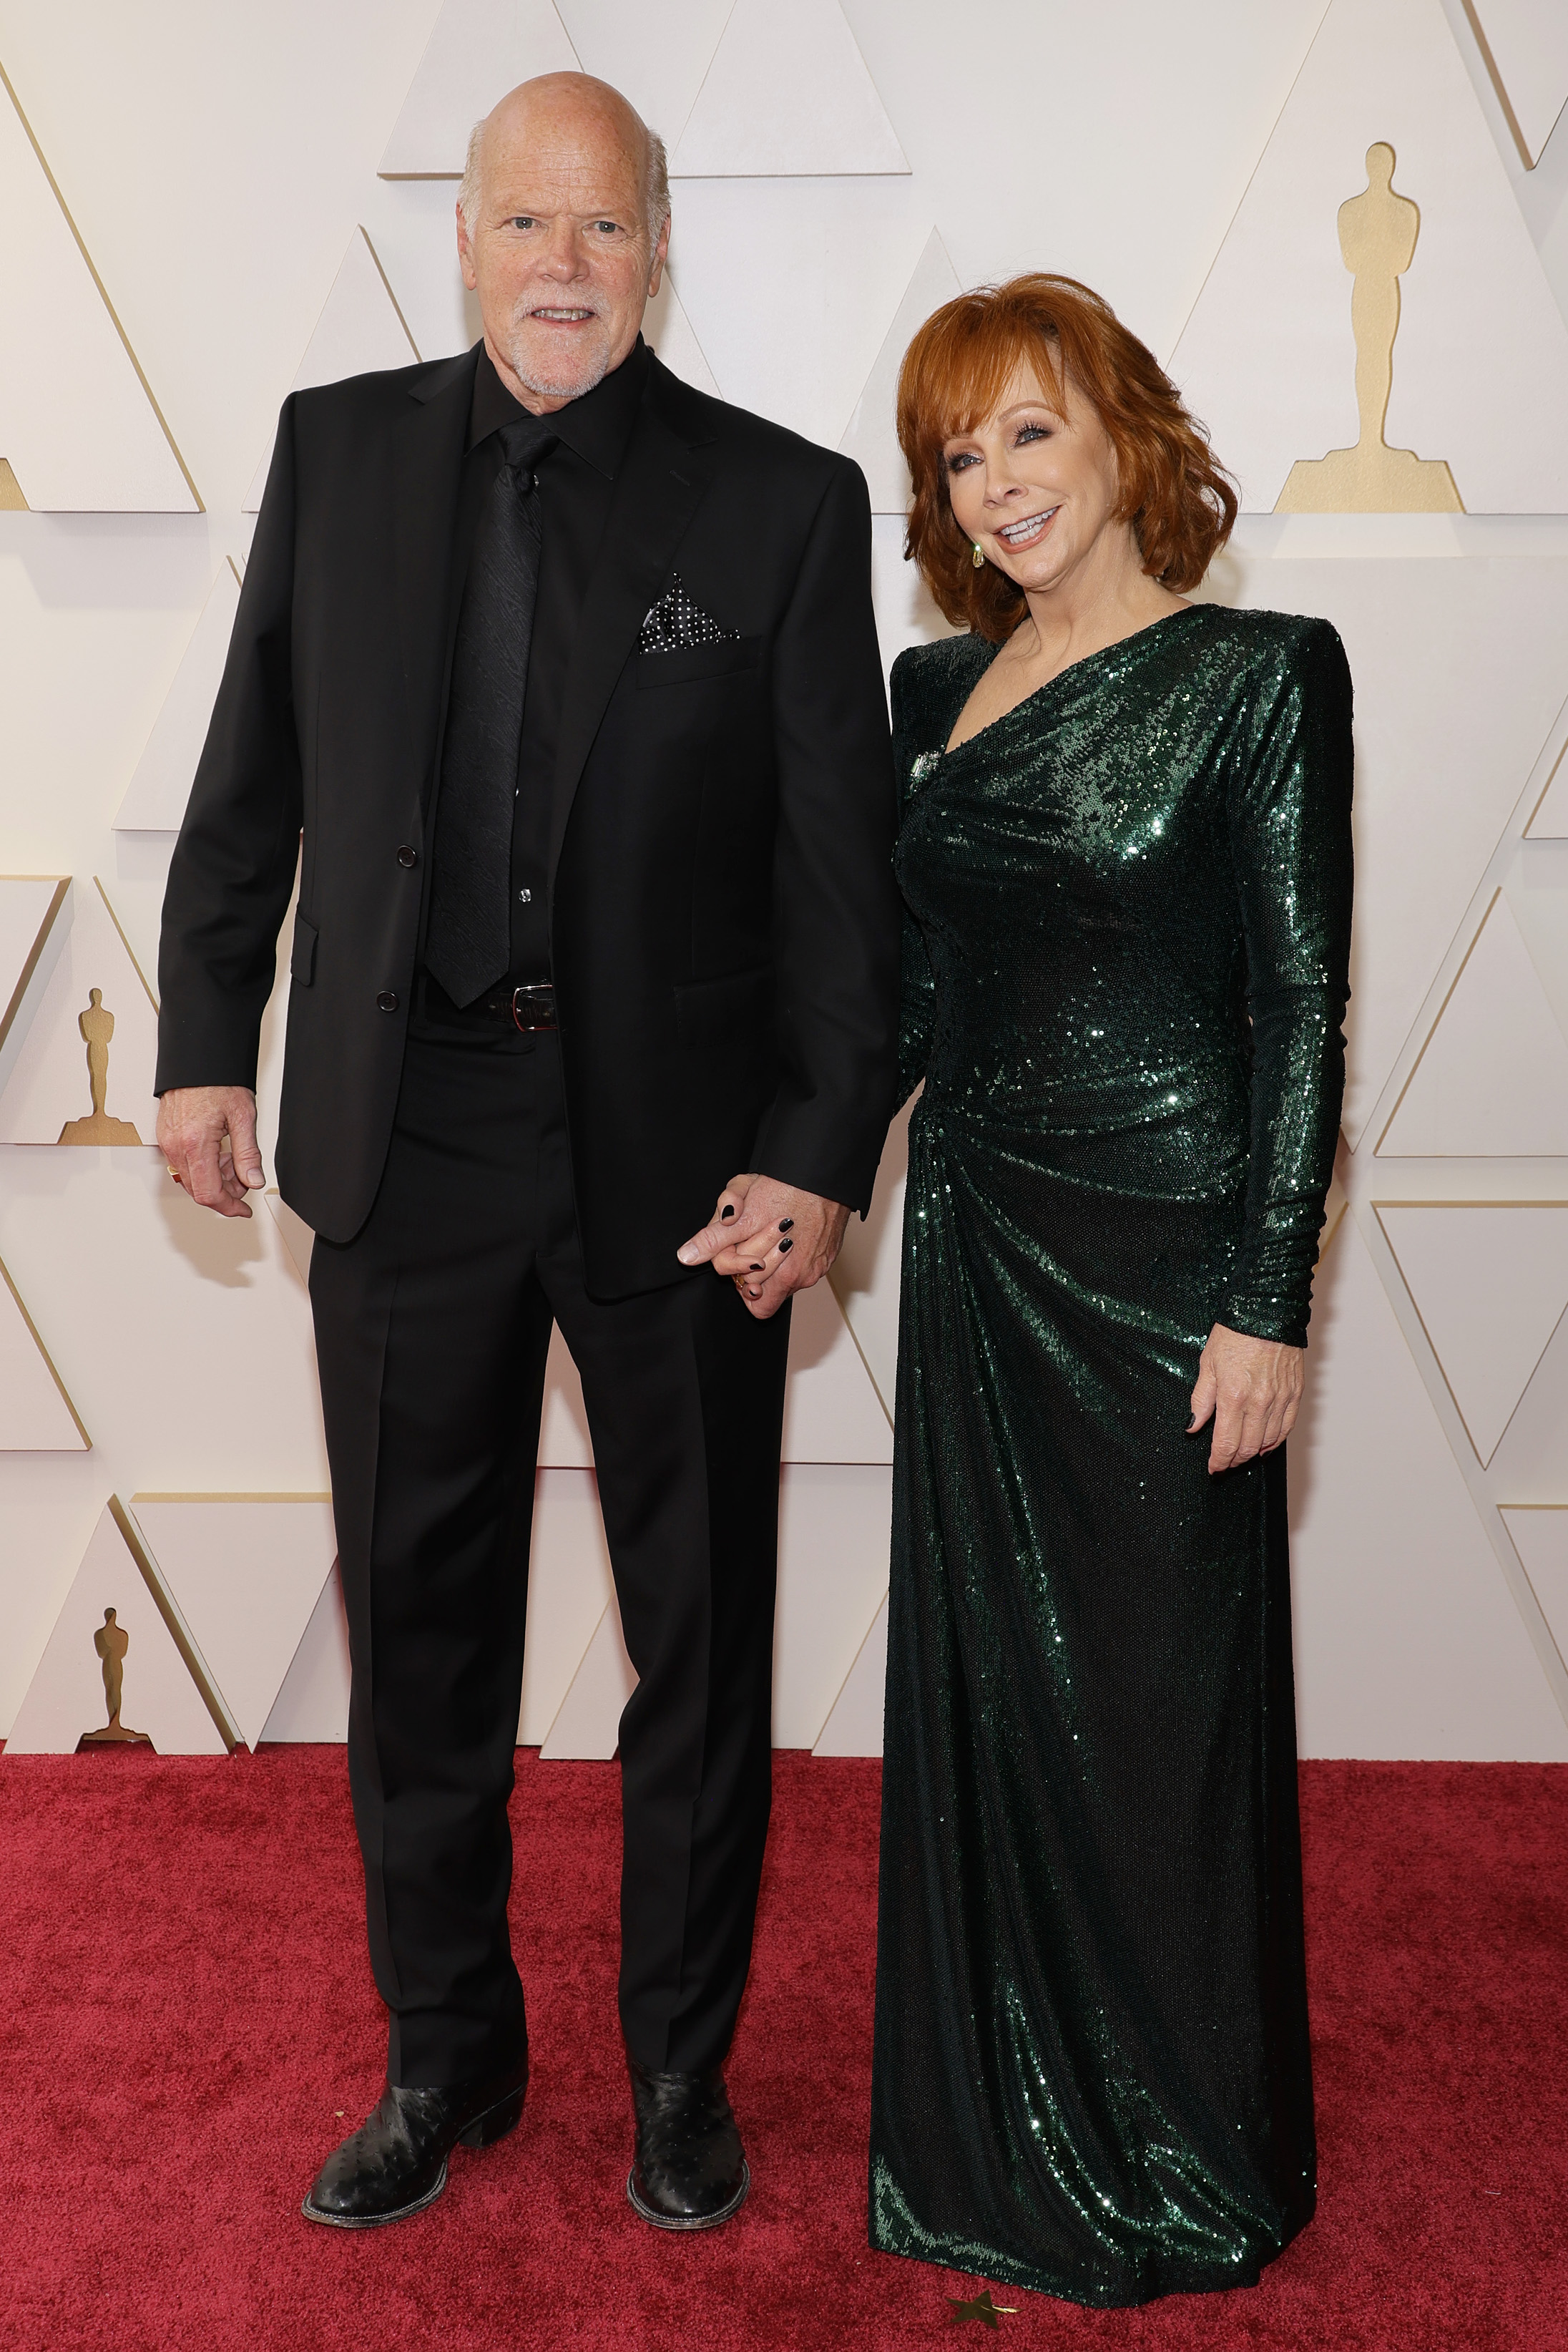 Rex Linn and Reba McEntire at the 94th Annual Academy Awards at Hollywood and Highland on March 27, 2022 in Hollywood, California. | Source: Getty Images